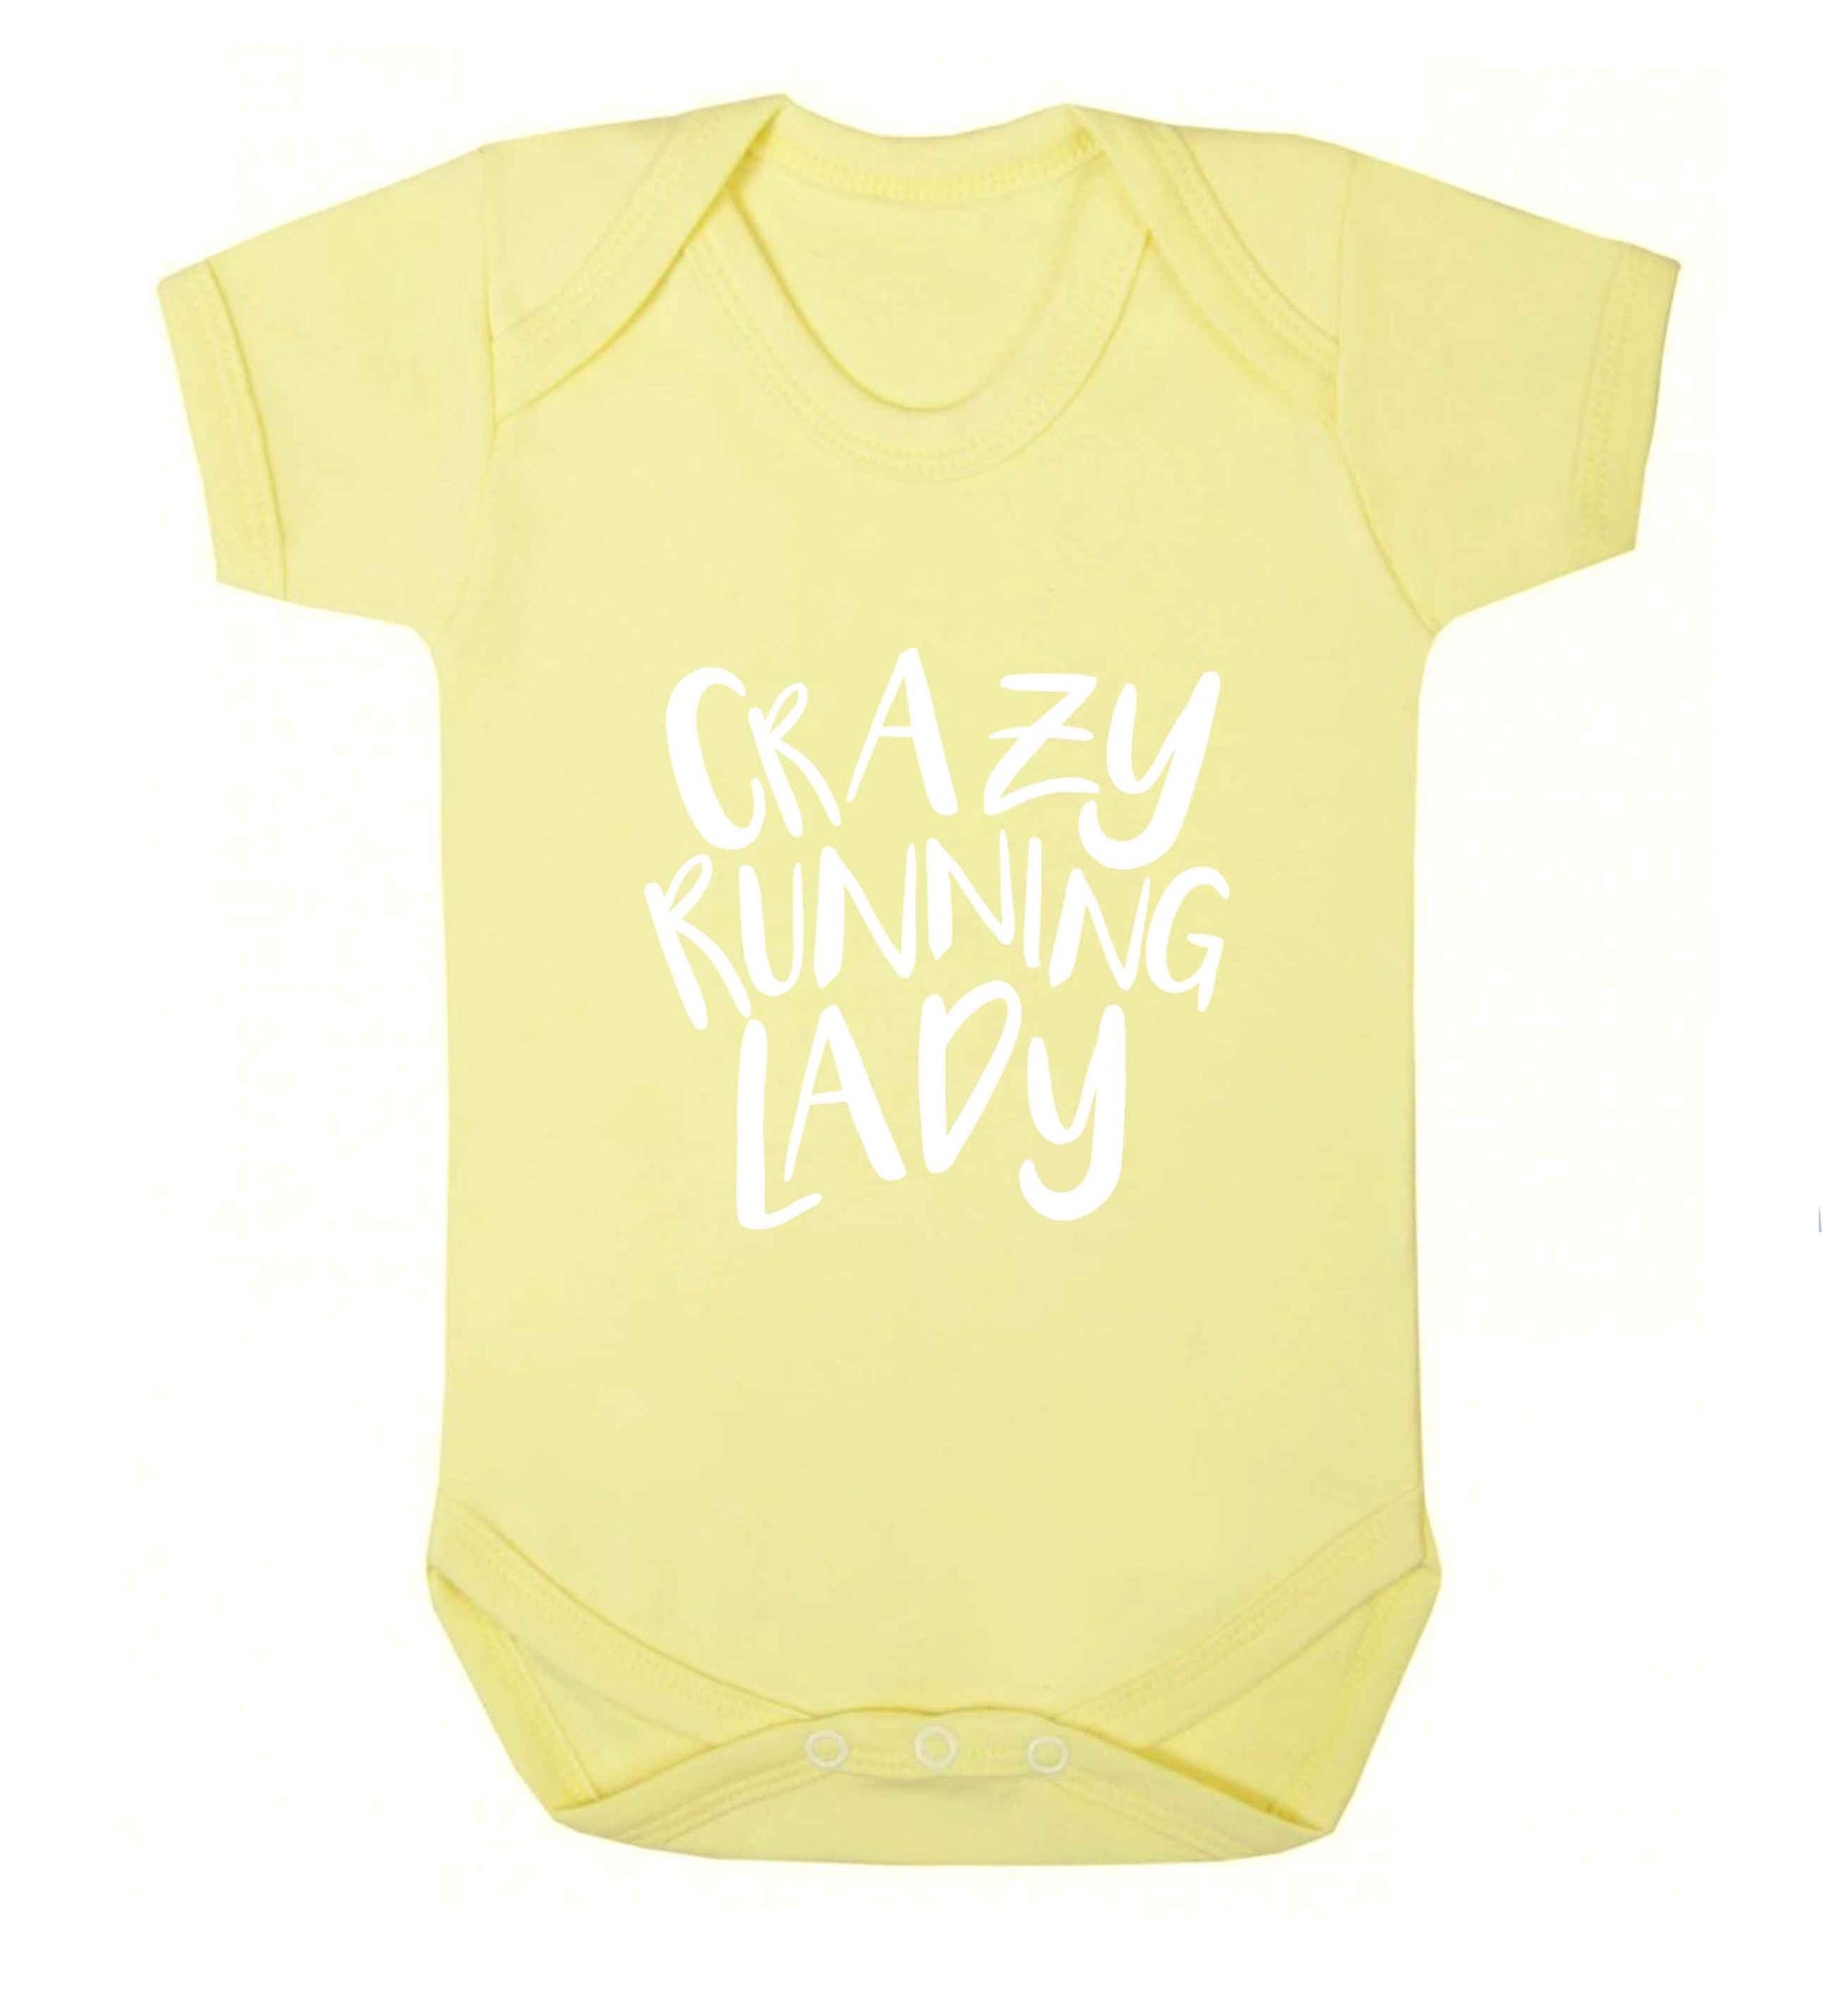 Crazy running lady baby vest pale yellow 18-24 months